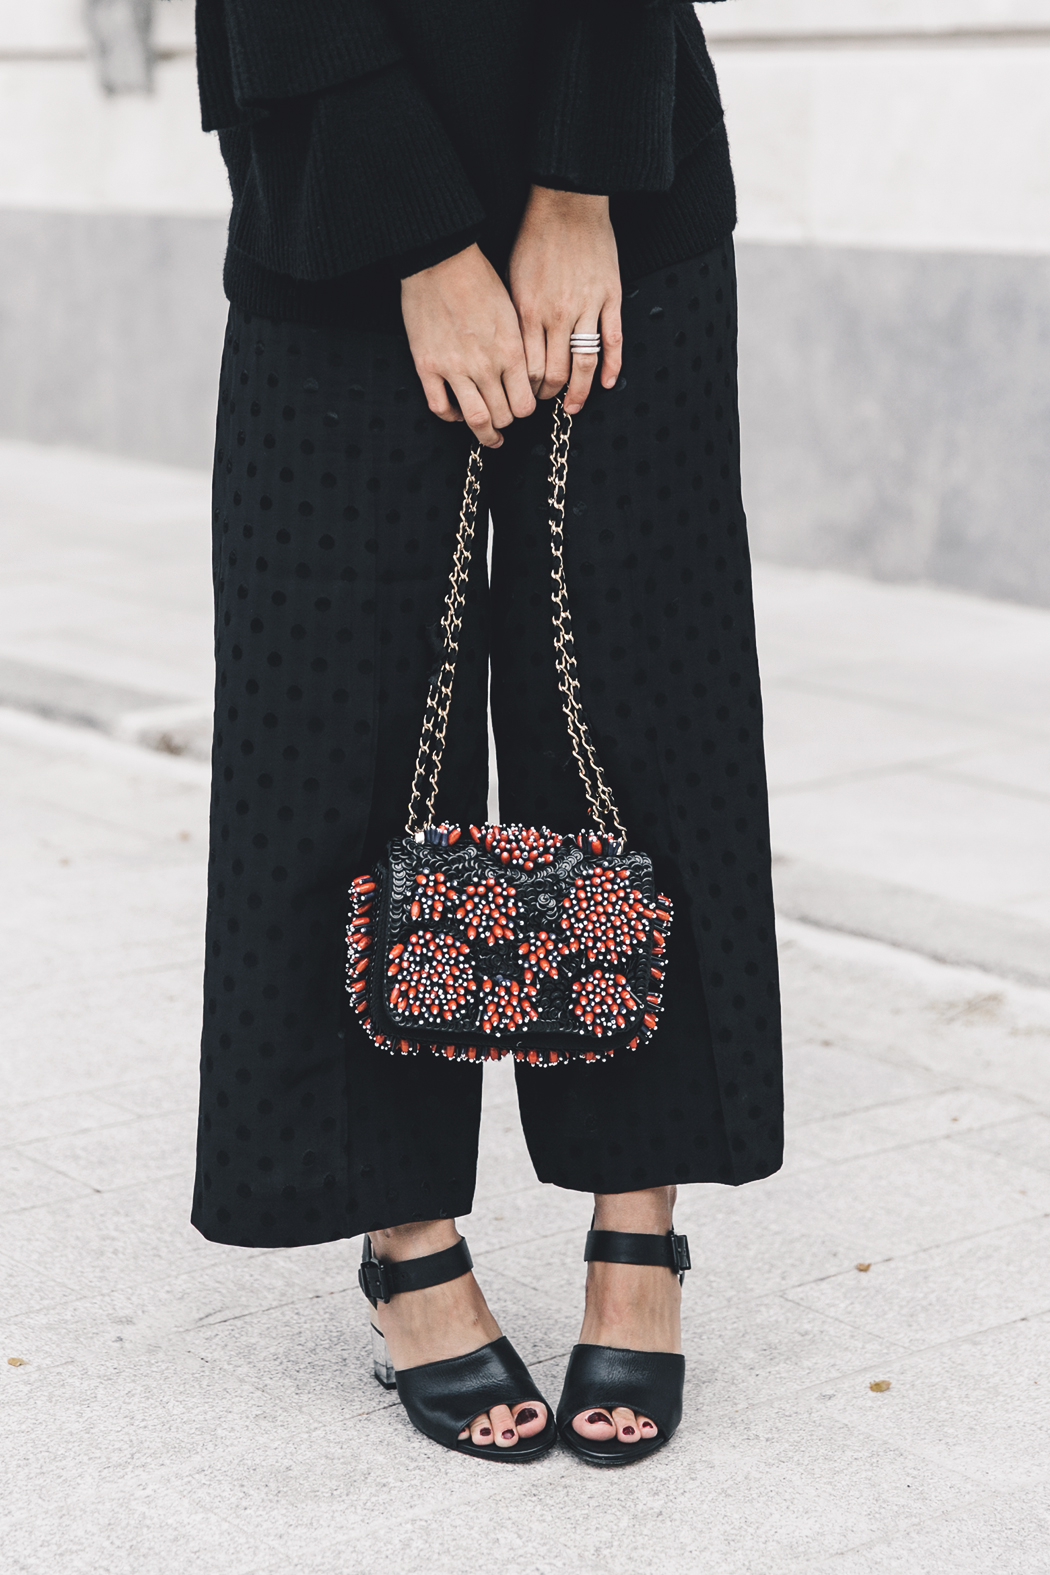 Ruffled_Sleeves_Jumper-Black_Culottes-Dune_Sandals-Beaded_Bag-Outfit-Collage_Vintage-Street_Style-31